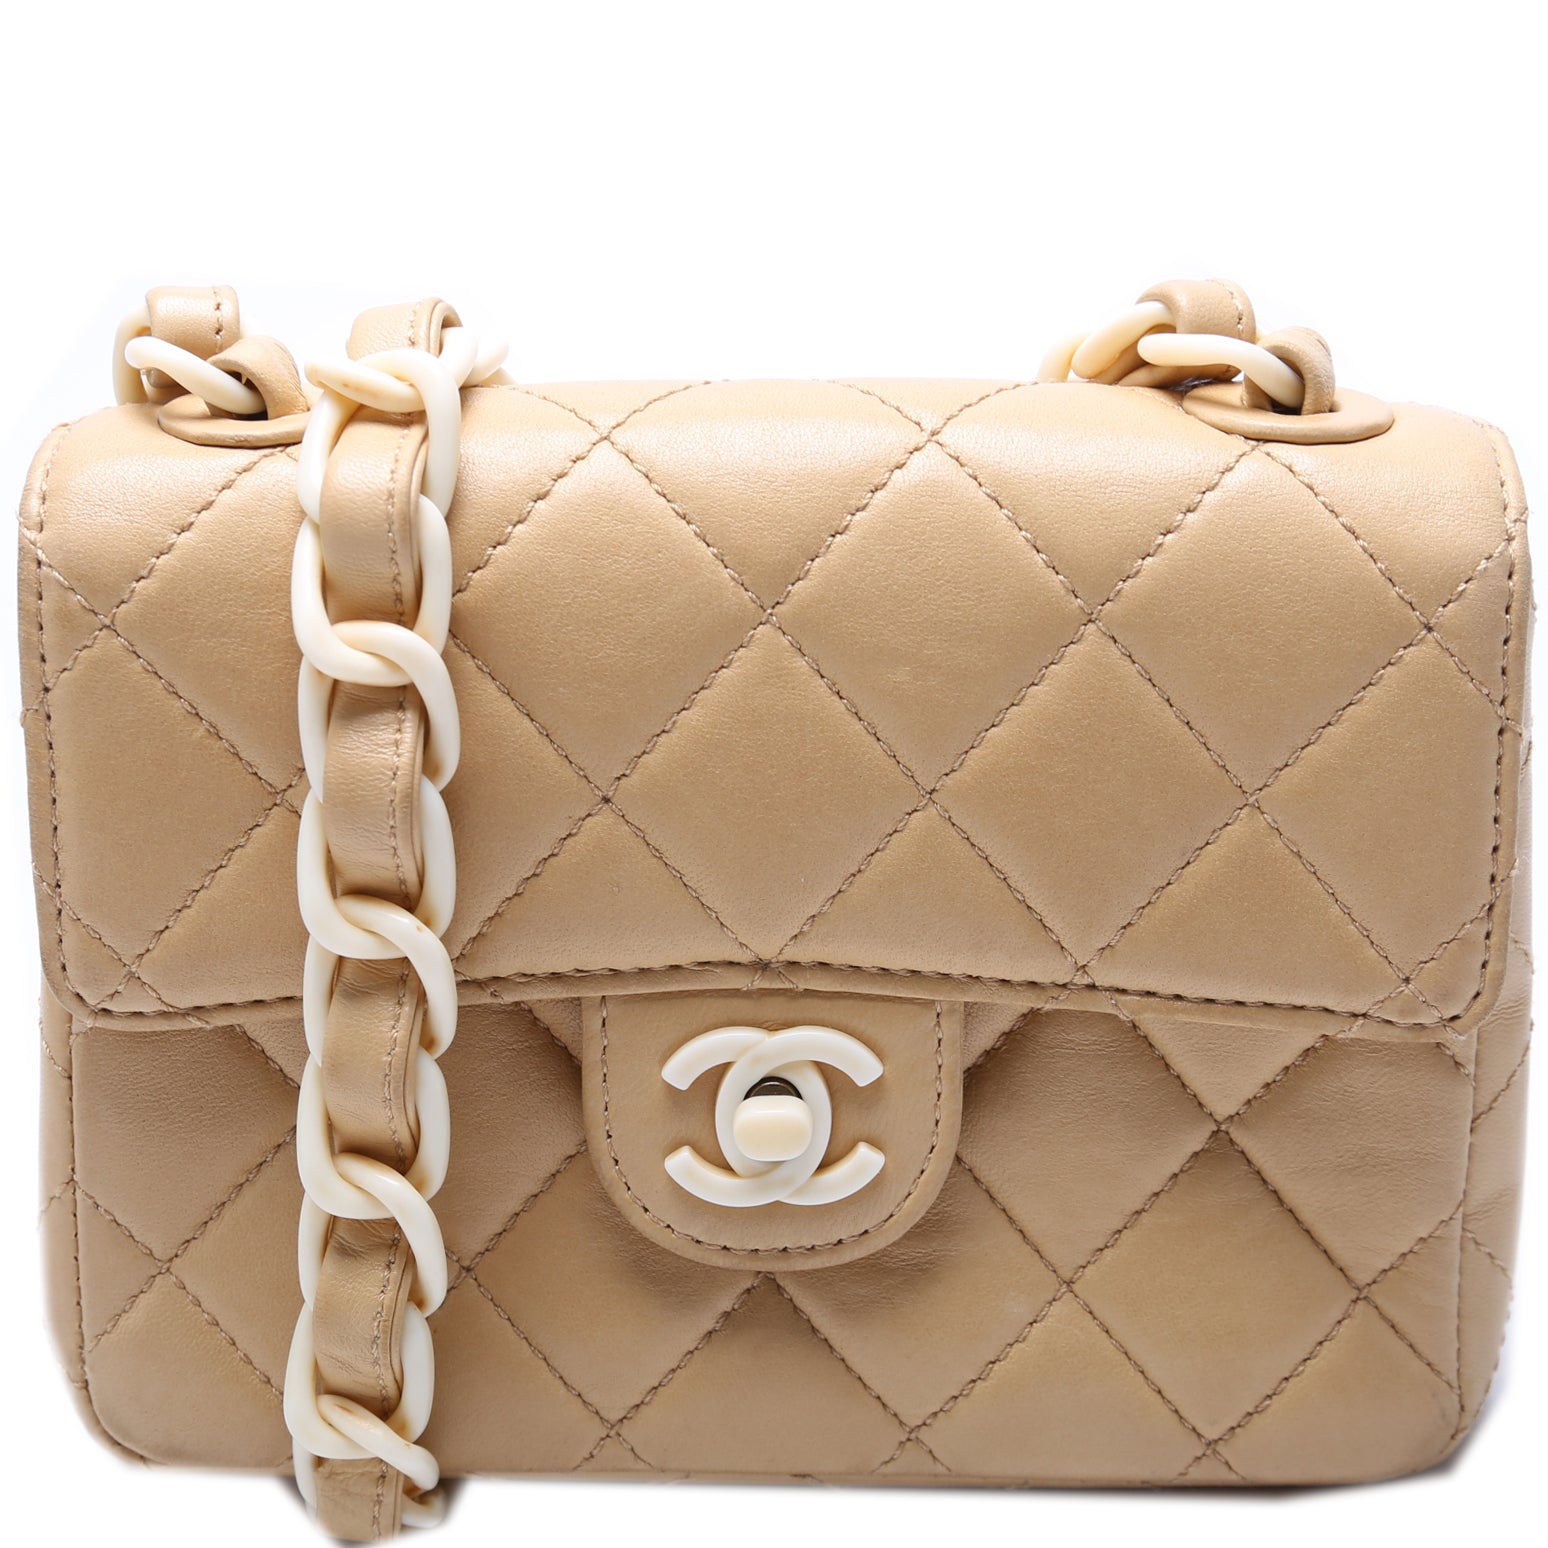 Chanel Quilted Lambskin Mini Rectangular Flap